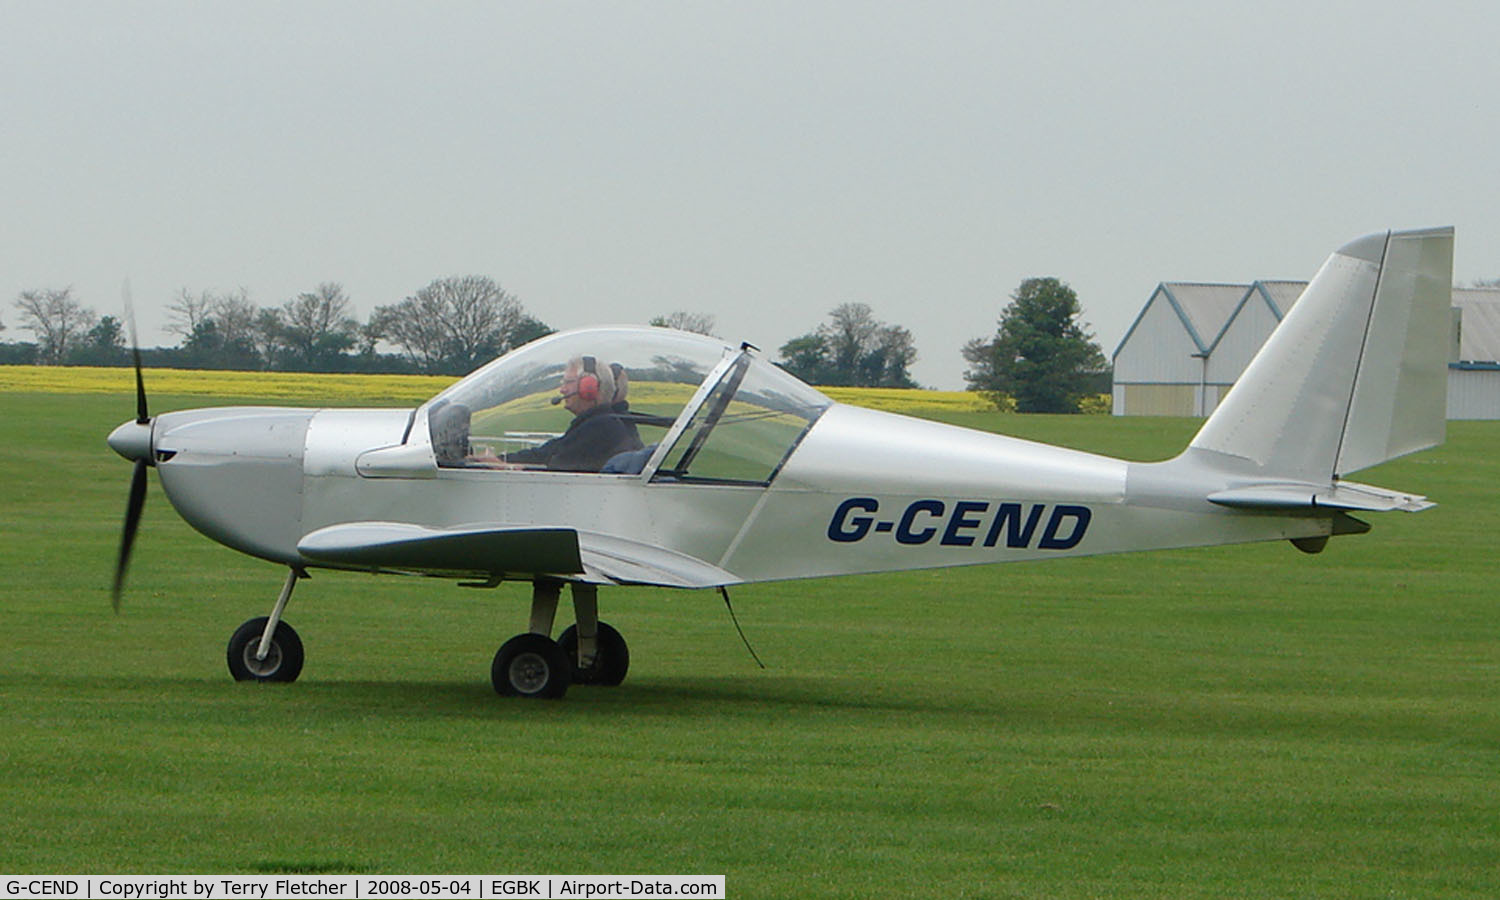 G-CEND, 2007 Cosmik EV-97 TeamEurostar UK C/N 2916, part of the Sywell GA scene on Tiger Moth Fly-in Day in May 2008